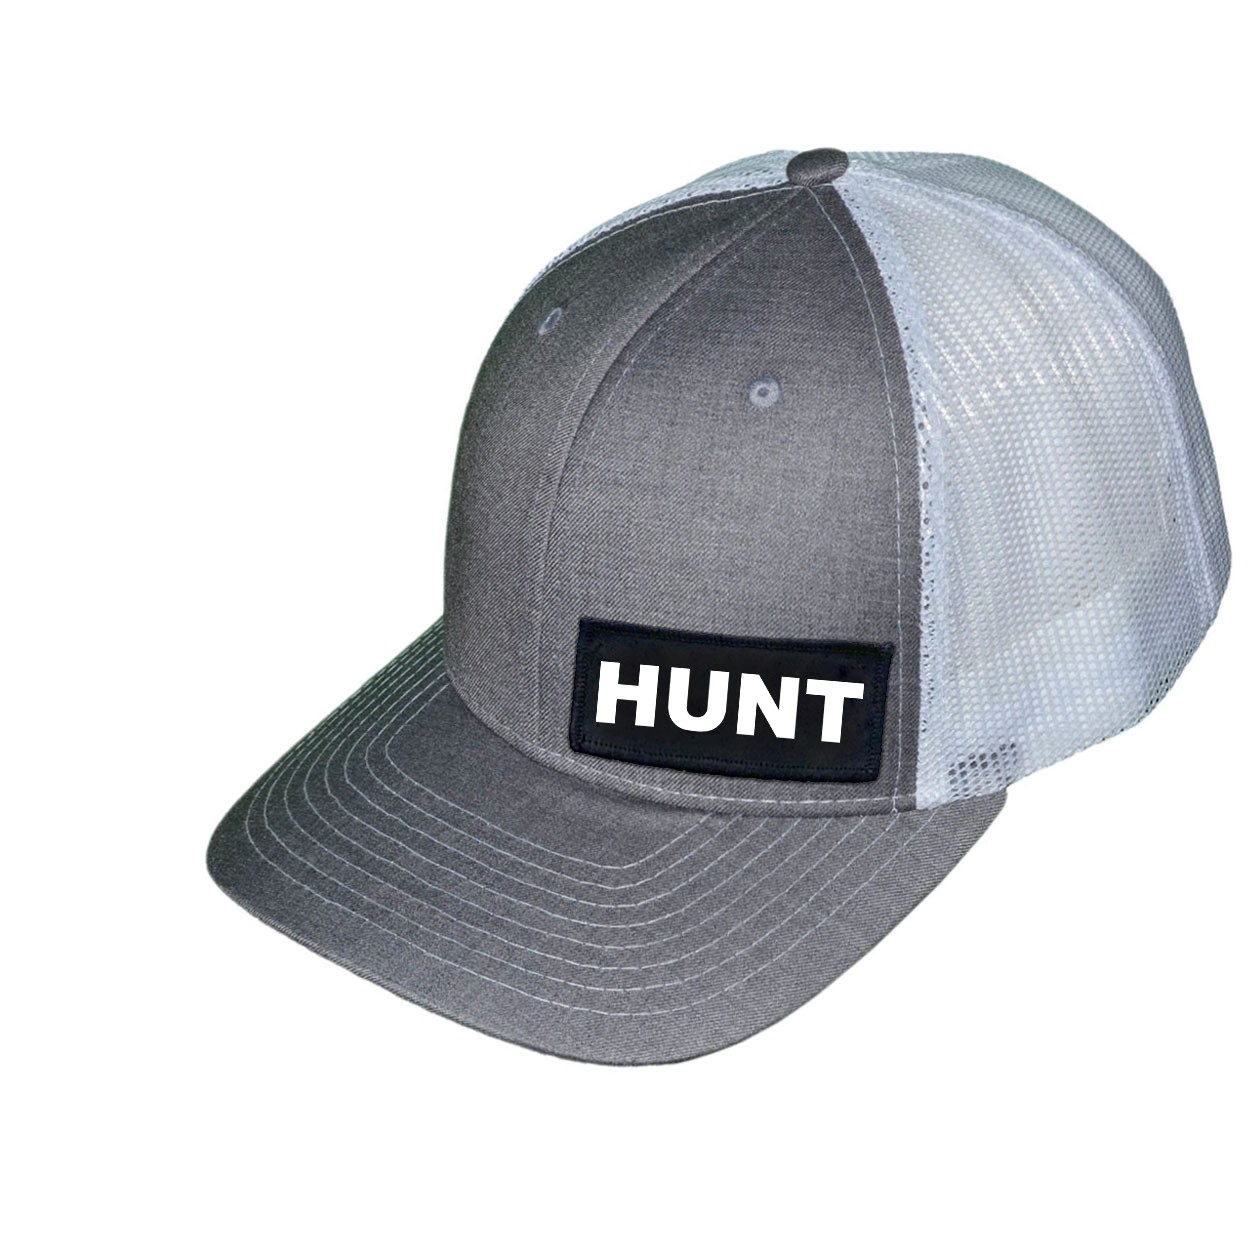 Hunt Brand Logo Night Out Woven Patch Snapback Trucker Hat Heather Gray/White (White Logo)